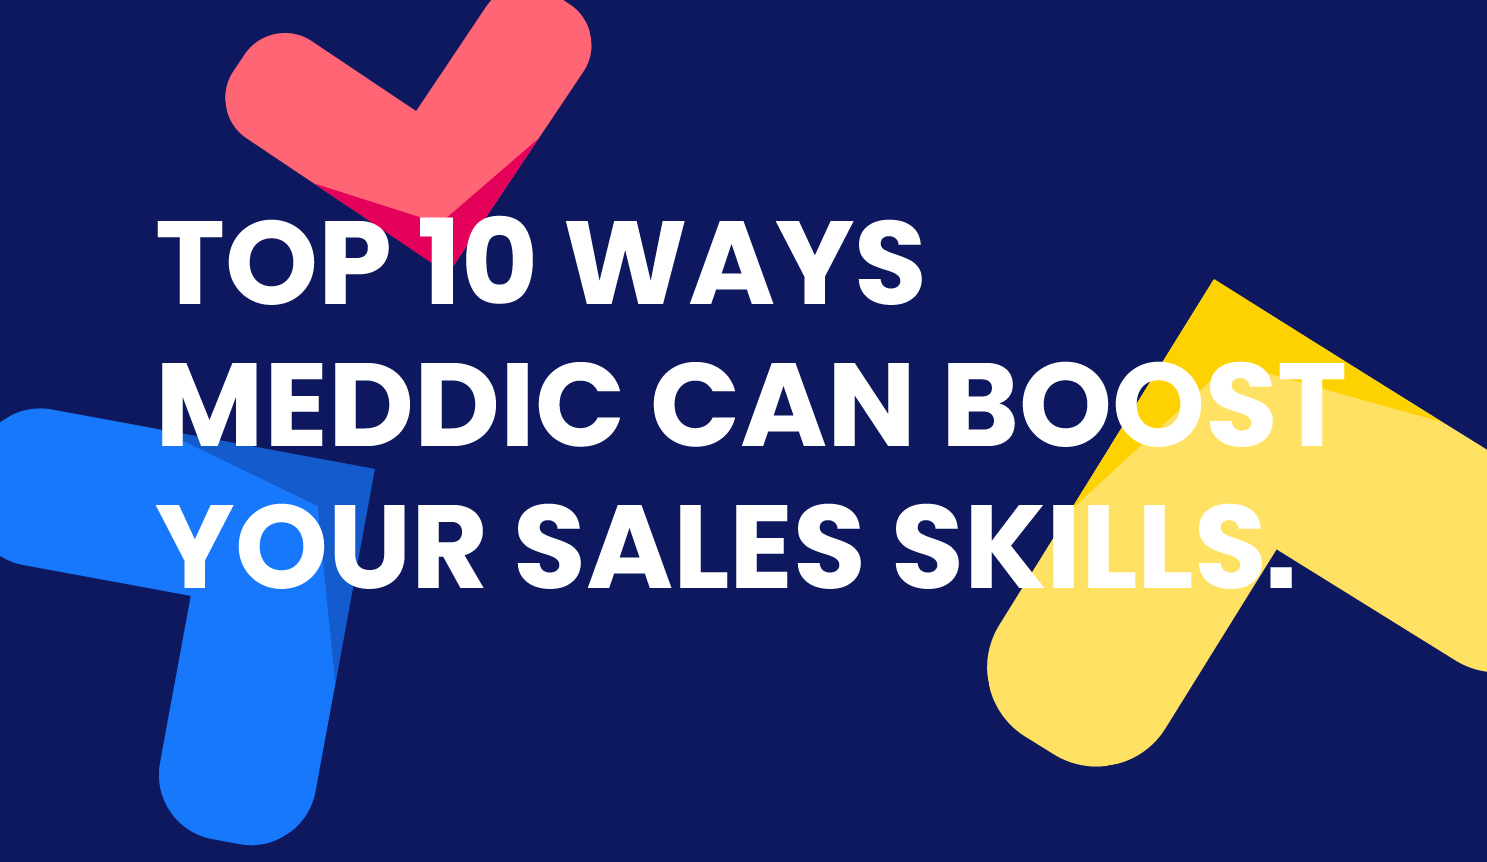 The Top Ten Ways MEDDPICC Can Level Up Your Sales Skills